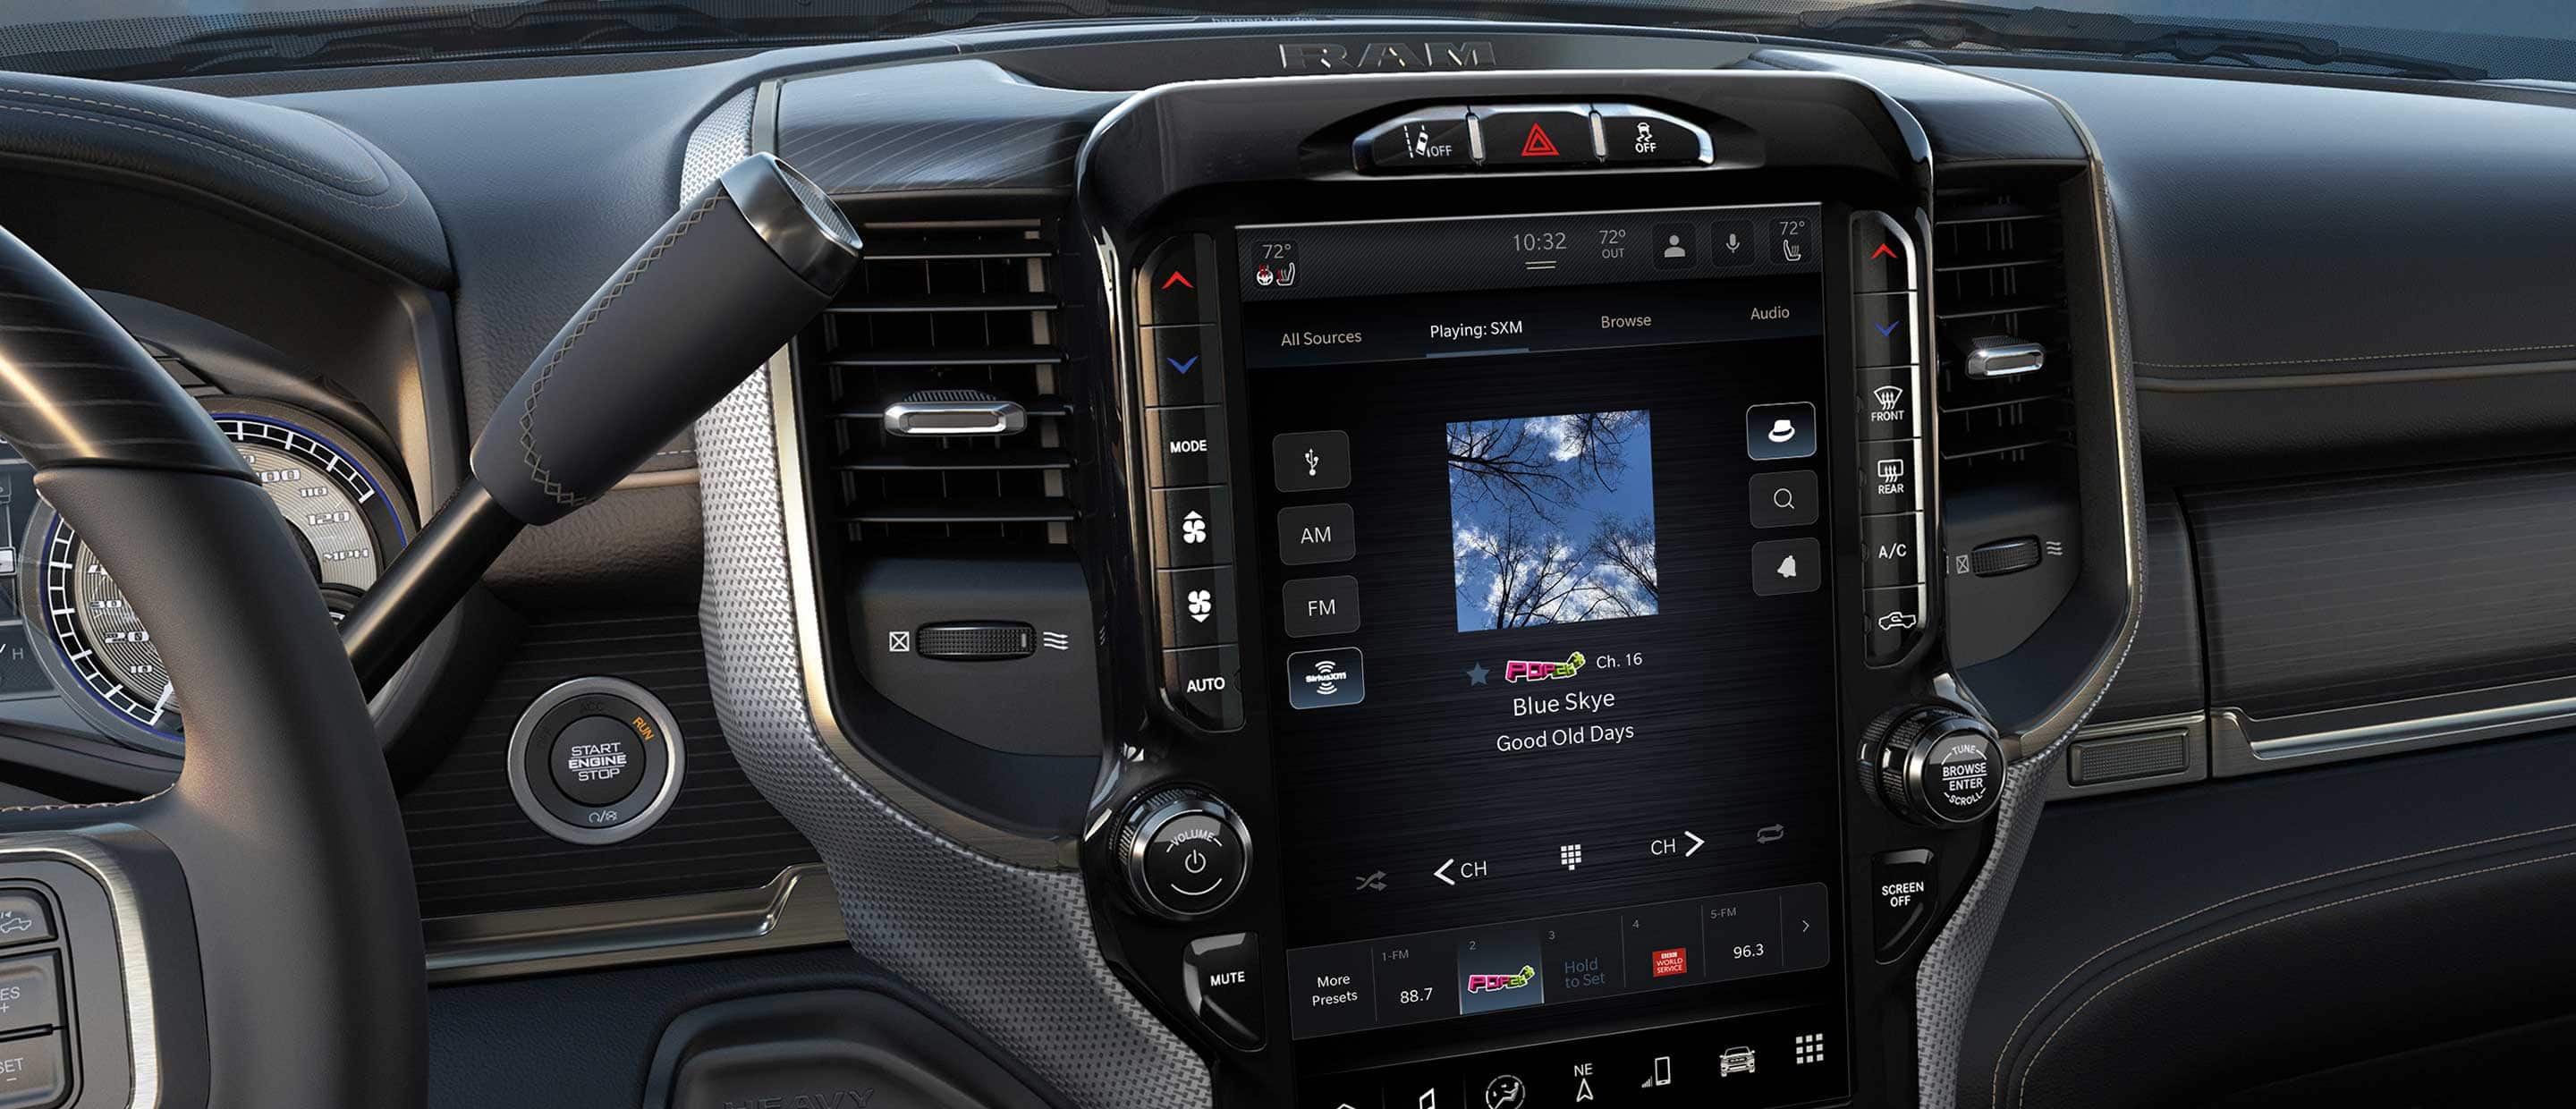 The Uconnect touchscreen in the 2022 Ram Chassis Cab displaying a music selection on the SiriusXM  screen.